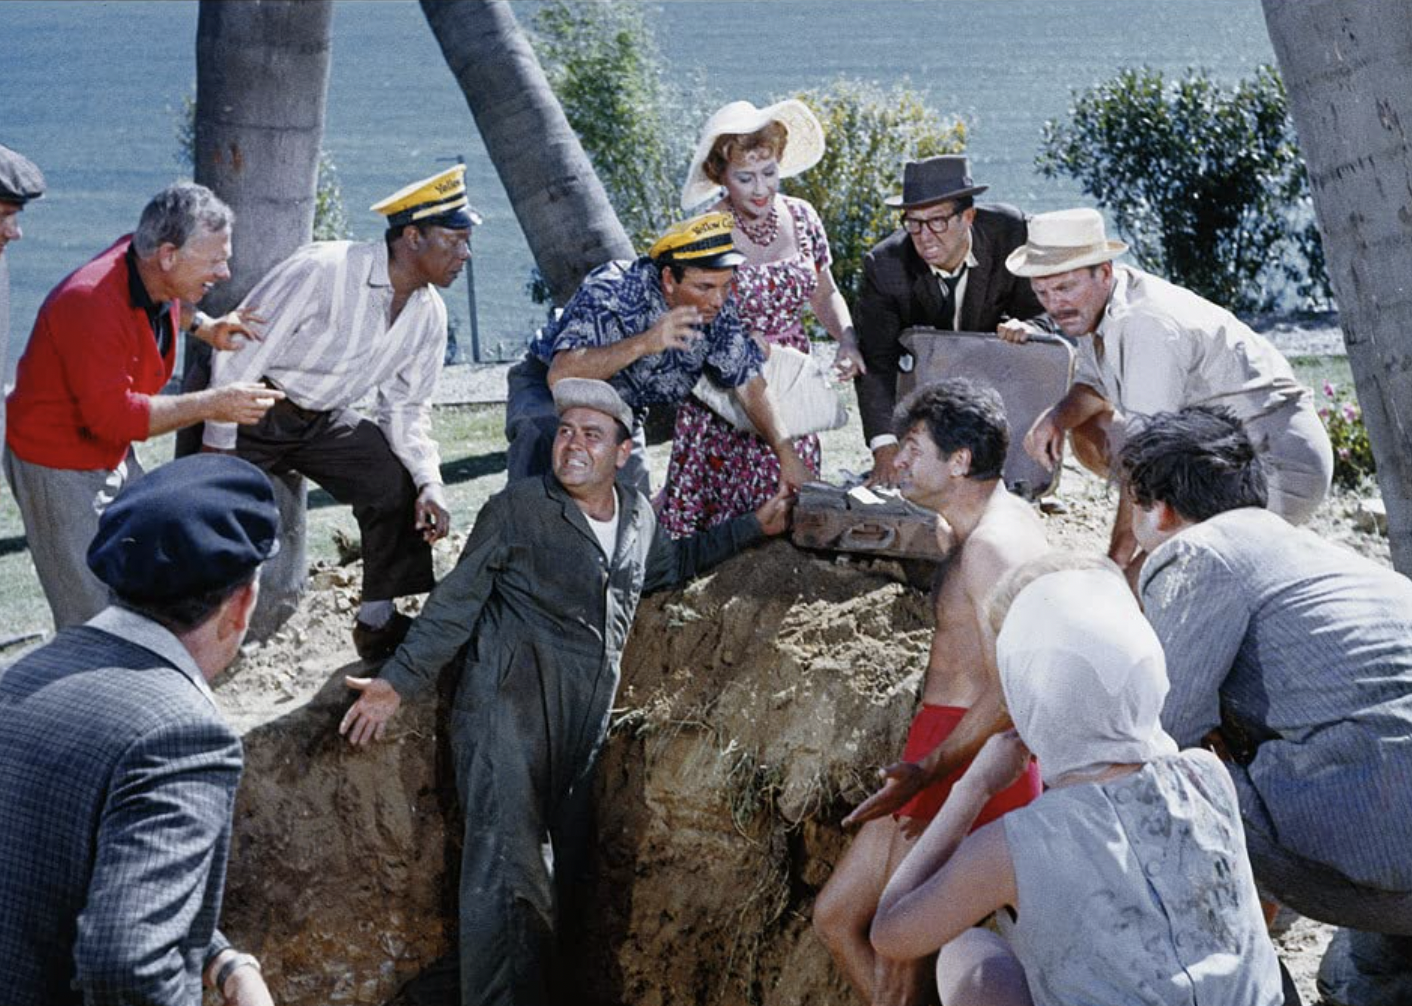 The cast of "It's a Mad, Mad, Mad, Mad World" in a scene from the film